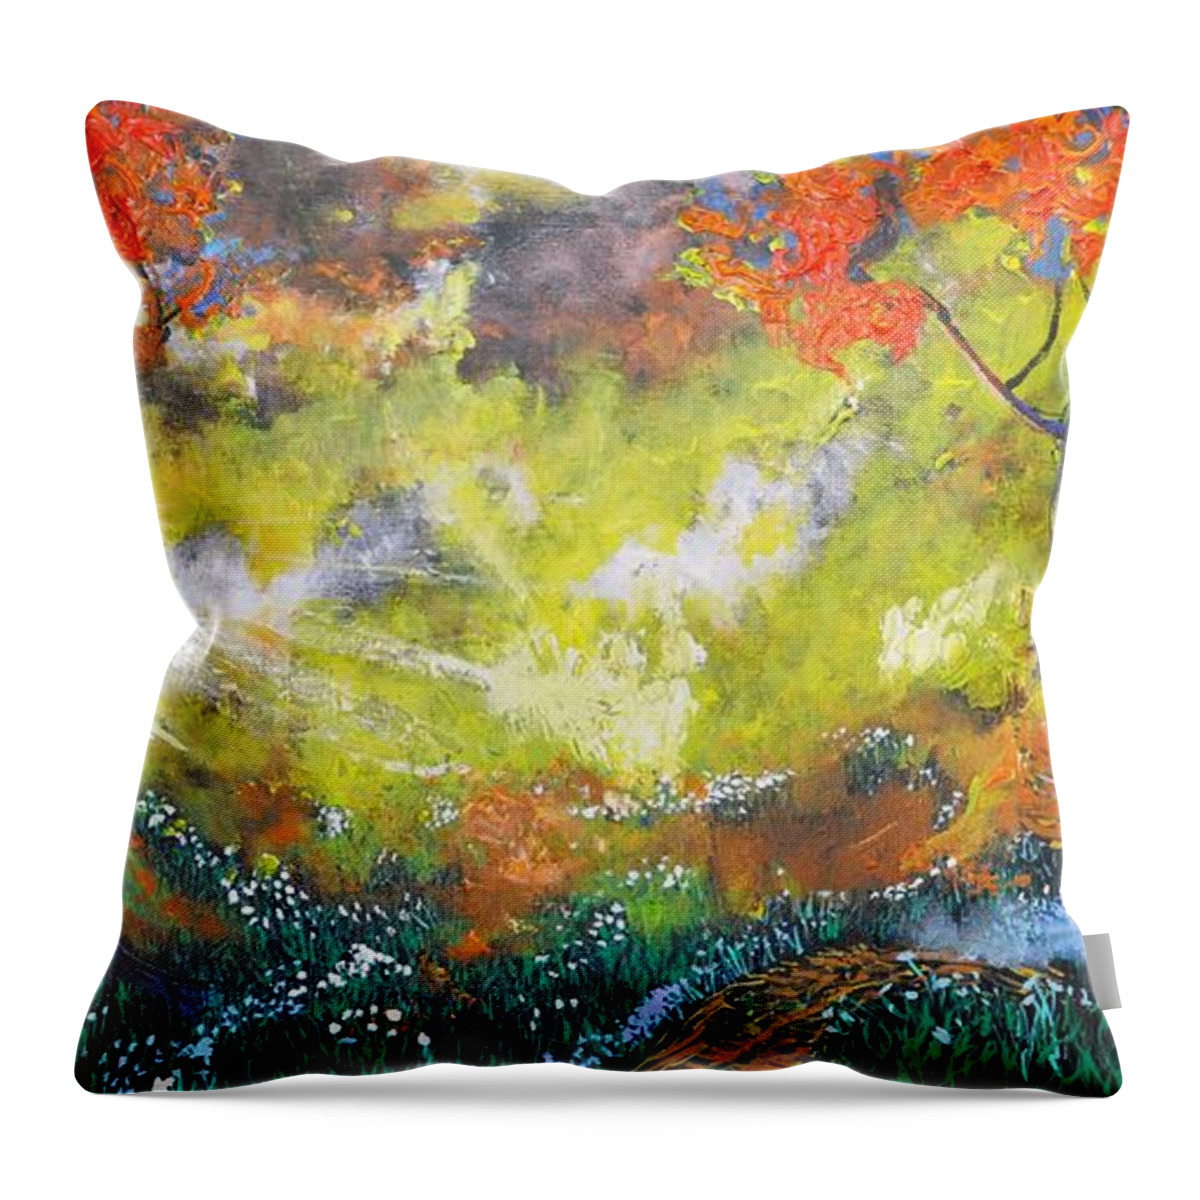 Morning Throw Pillow featuring the painting Through The Myst by Stefan Duncan